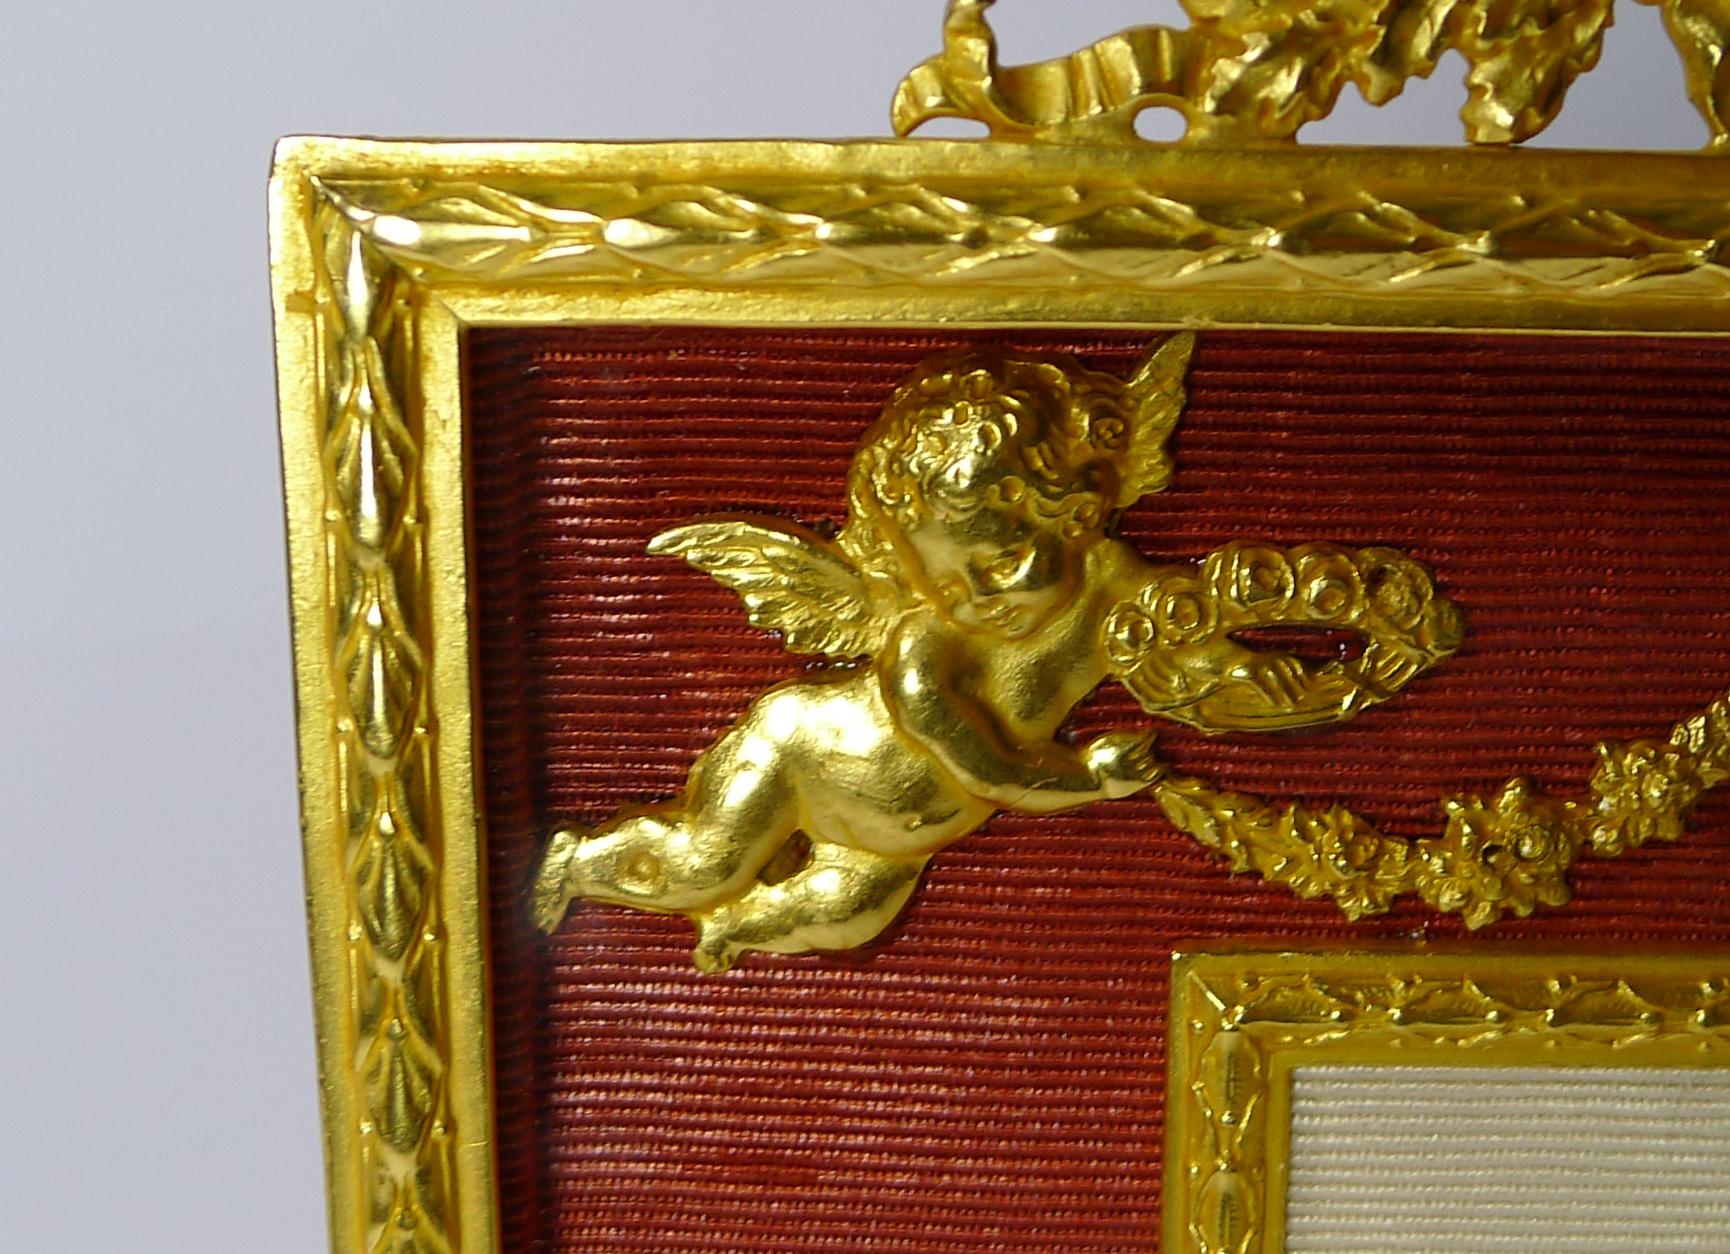 A stunning French Ormolu photograph frame dating to circa 1900 having been fully restored to it's former glory; the bronze smothered in gold.

Glass covers the entire front with the central picture aperture measures 3 1/2